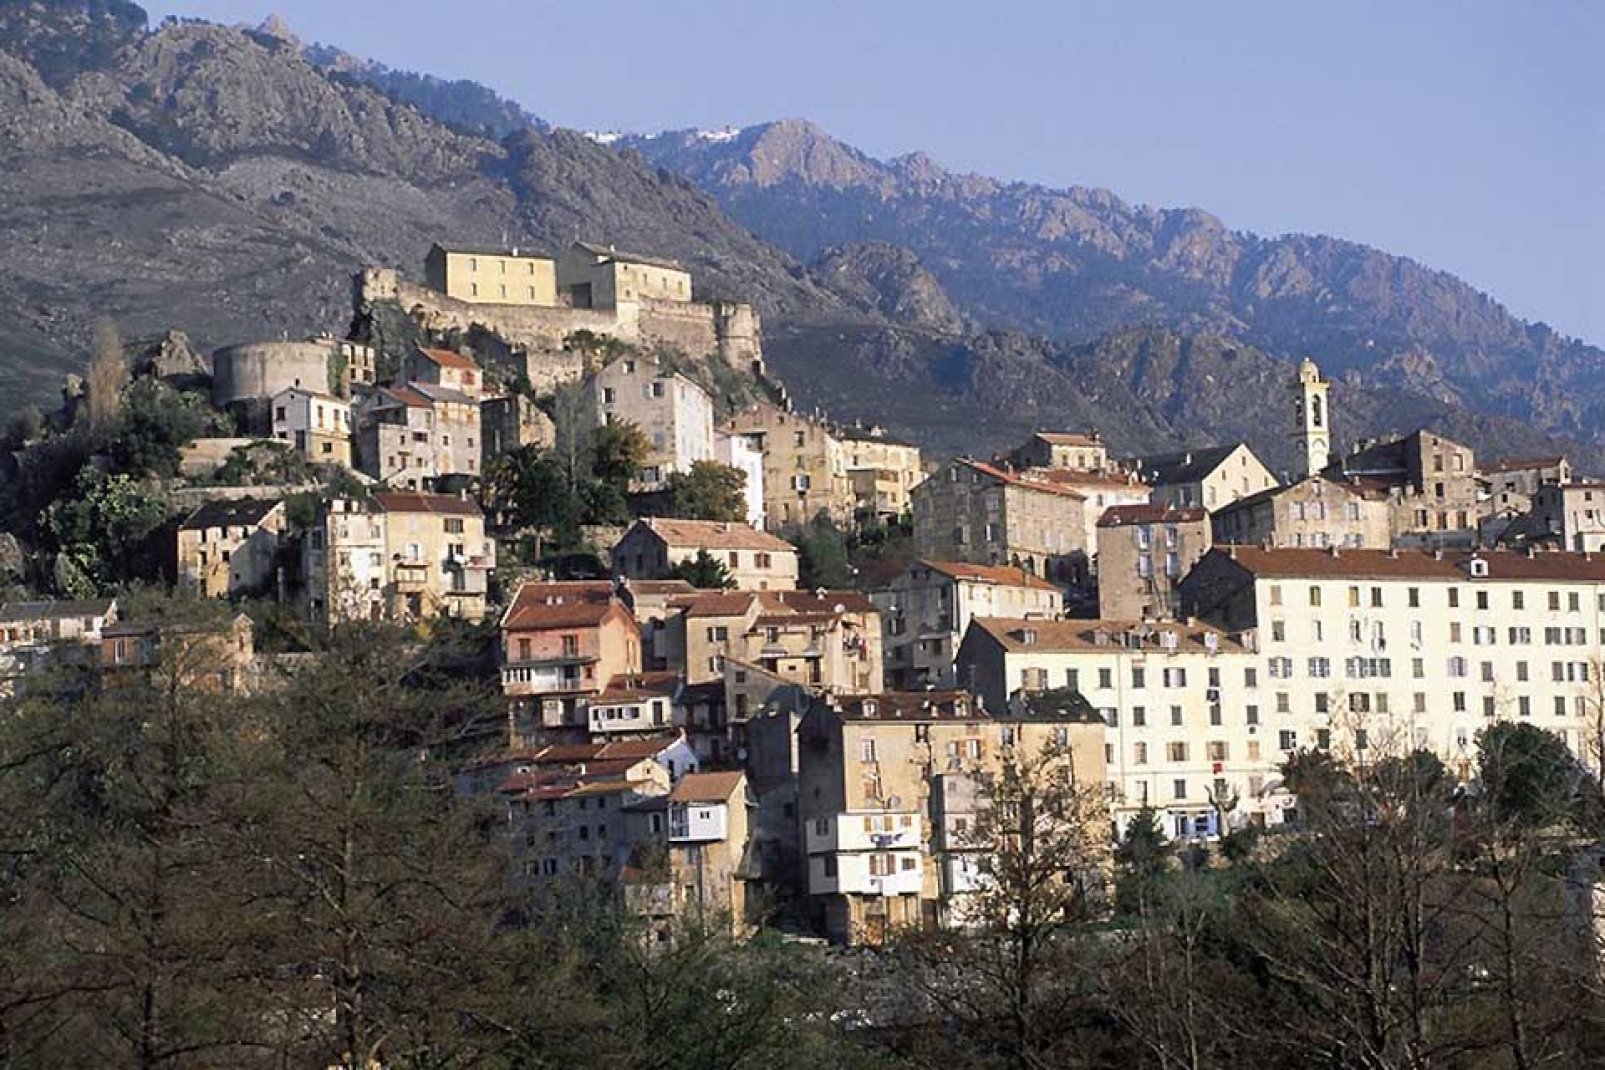 Corte was the capital of Corsica when it was an independent state.